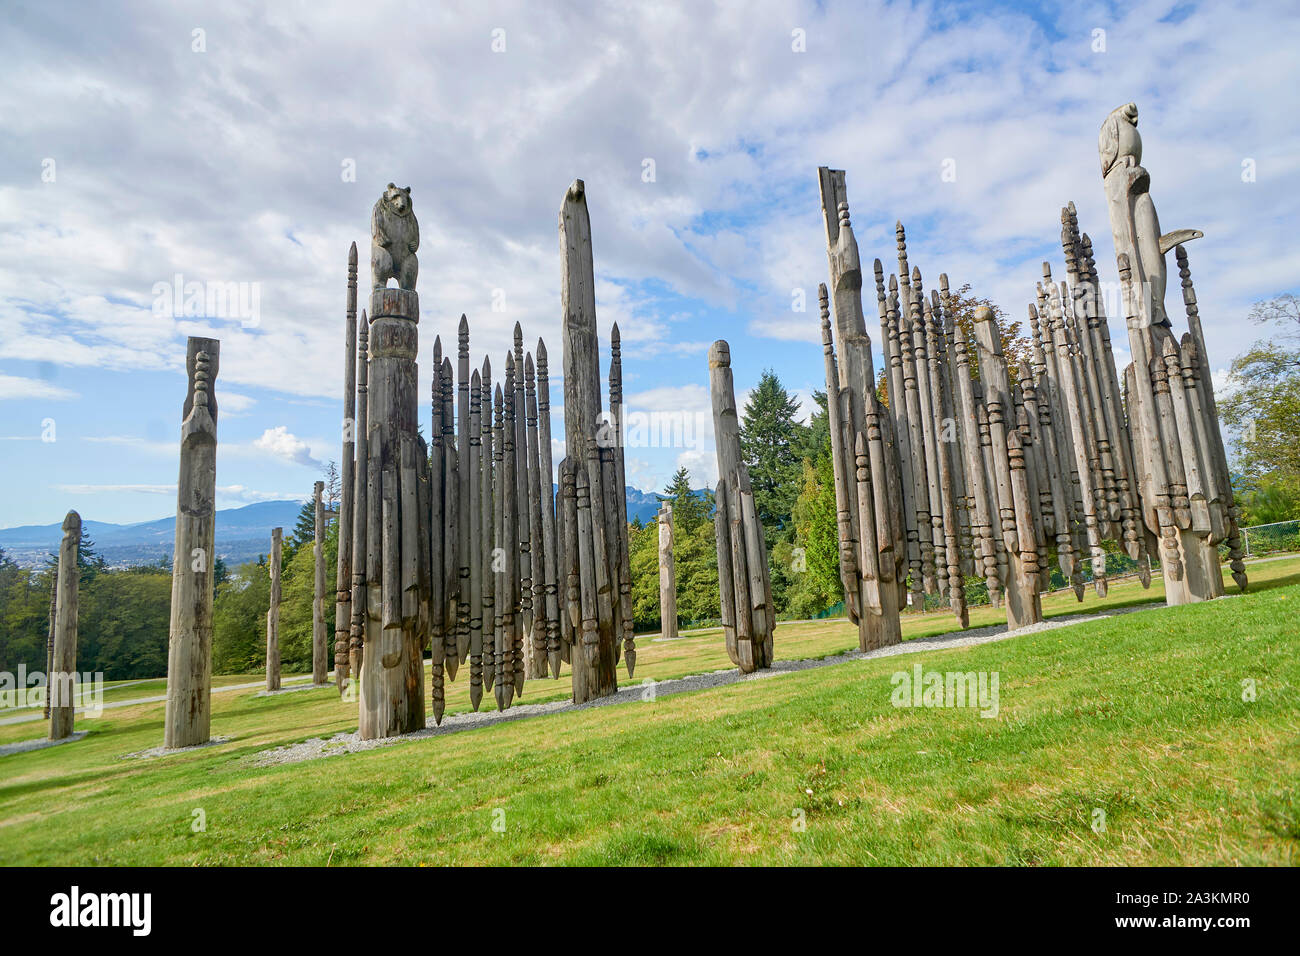 A view of the Totem Poles in Kushiro Park, Vancouver Stock Photo